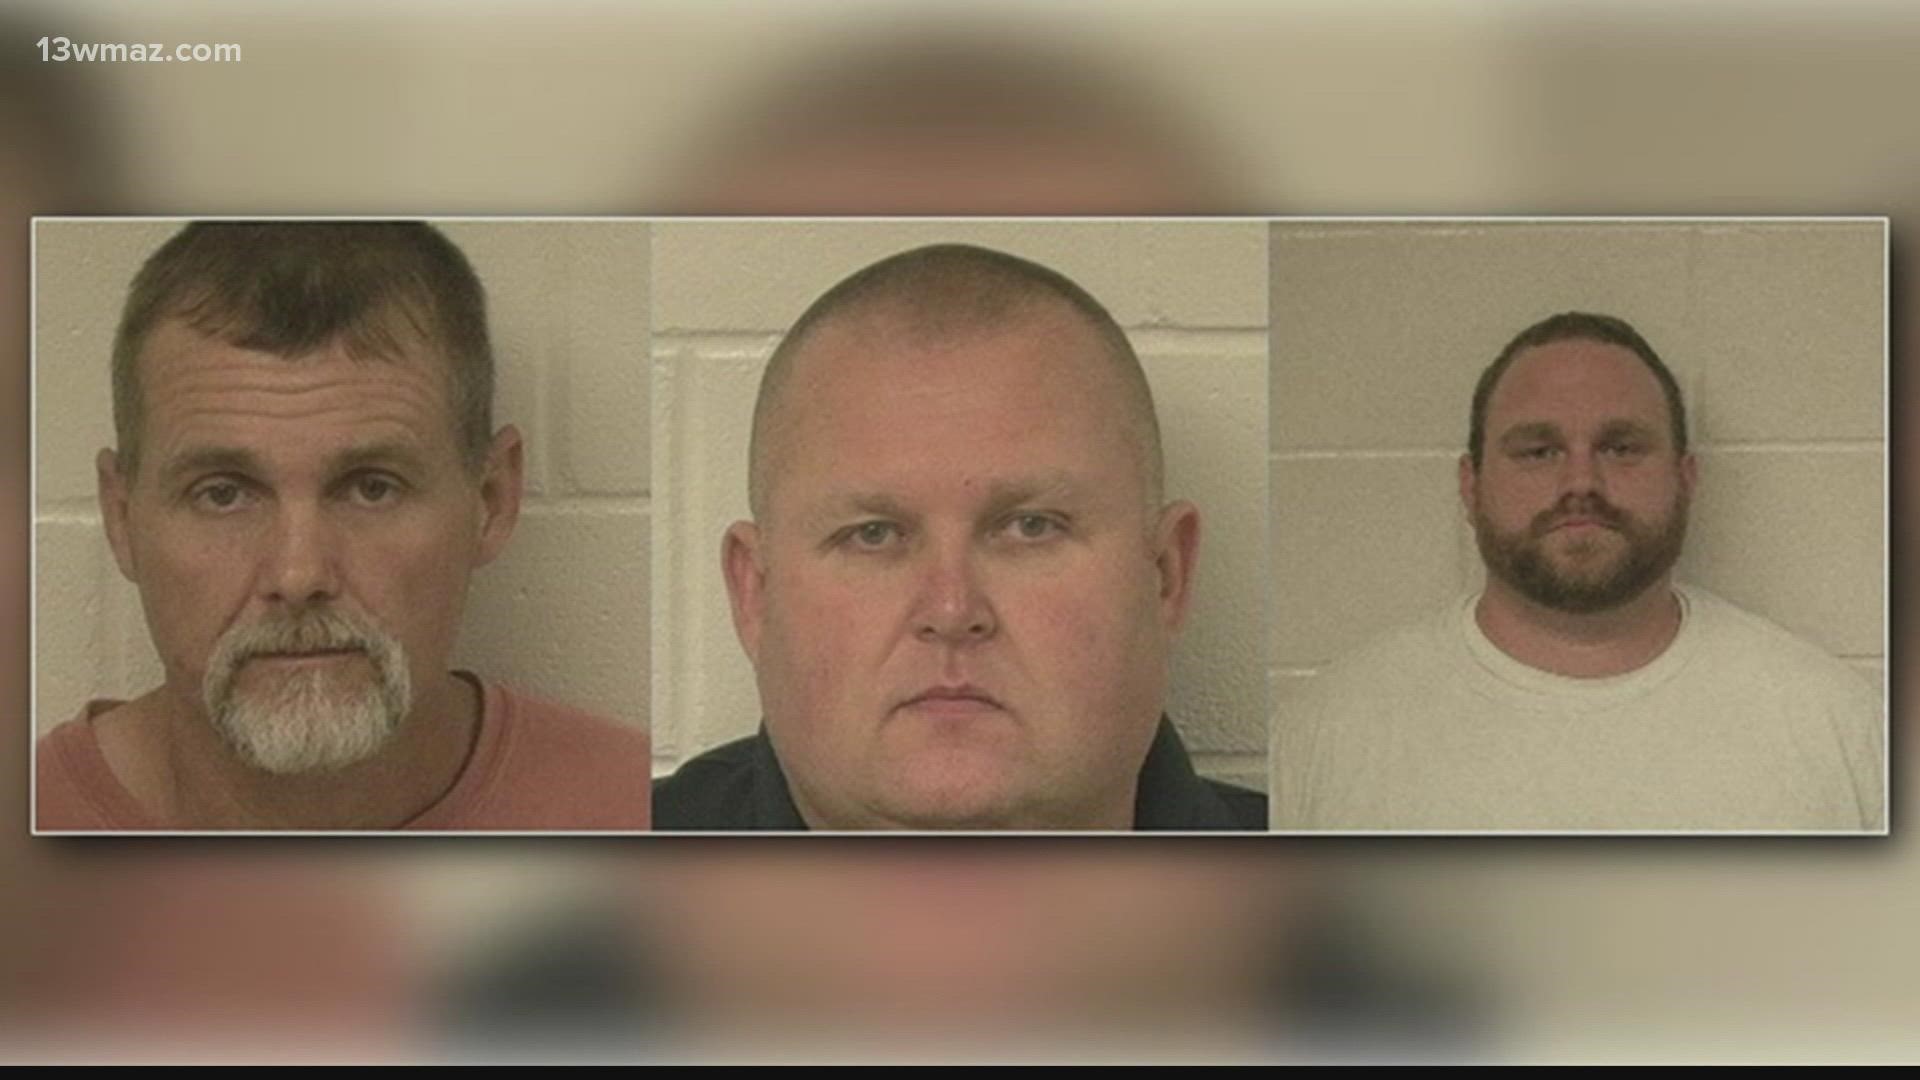 Henry Lee Copeland, Michael Howell, and Rhett Scott are accused of killing Eurie Martin in July 2017.